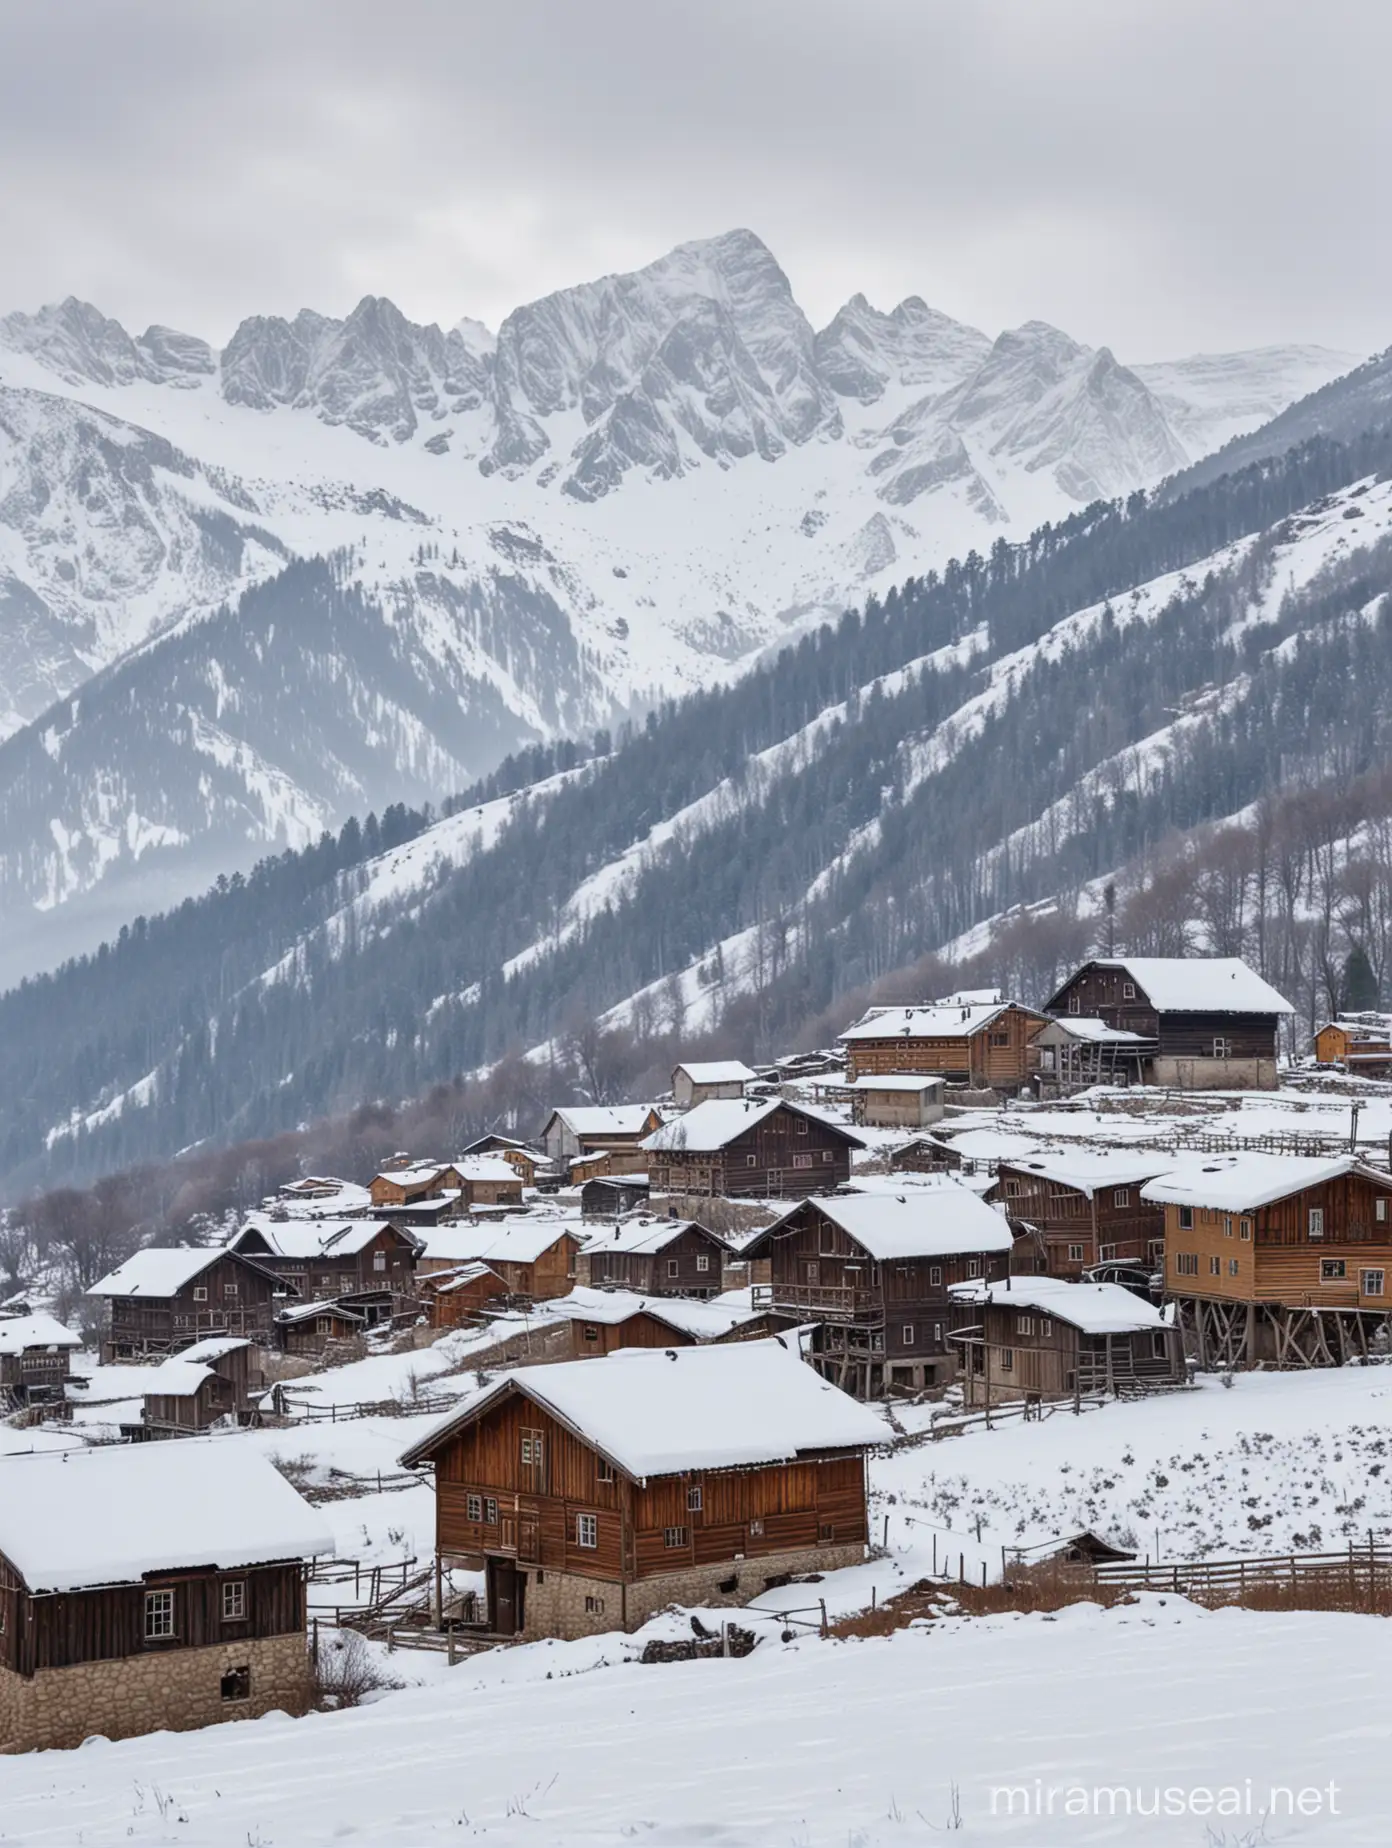 Snowy Mountain Village with Vintage Wooden Houses